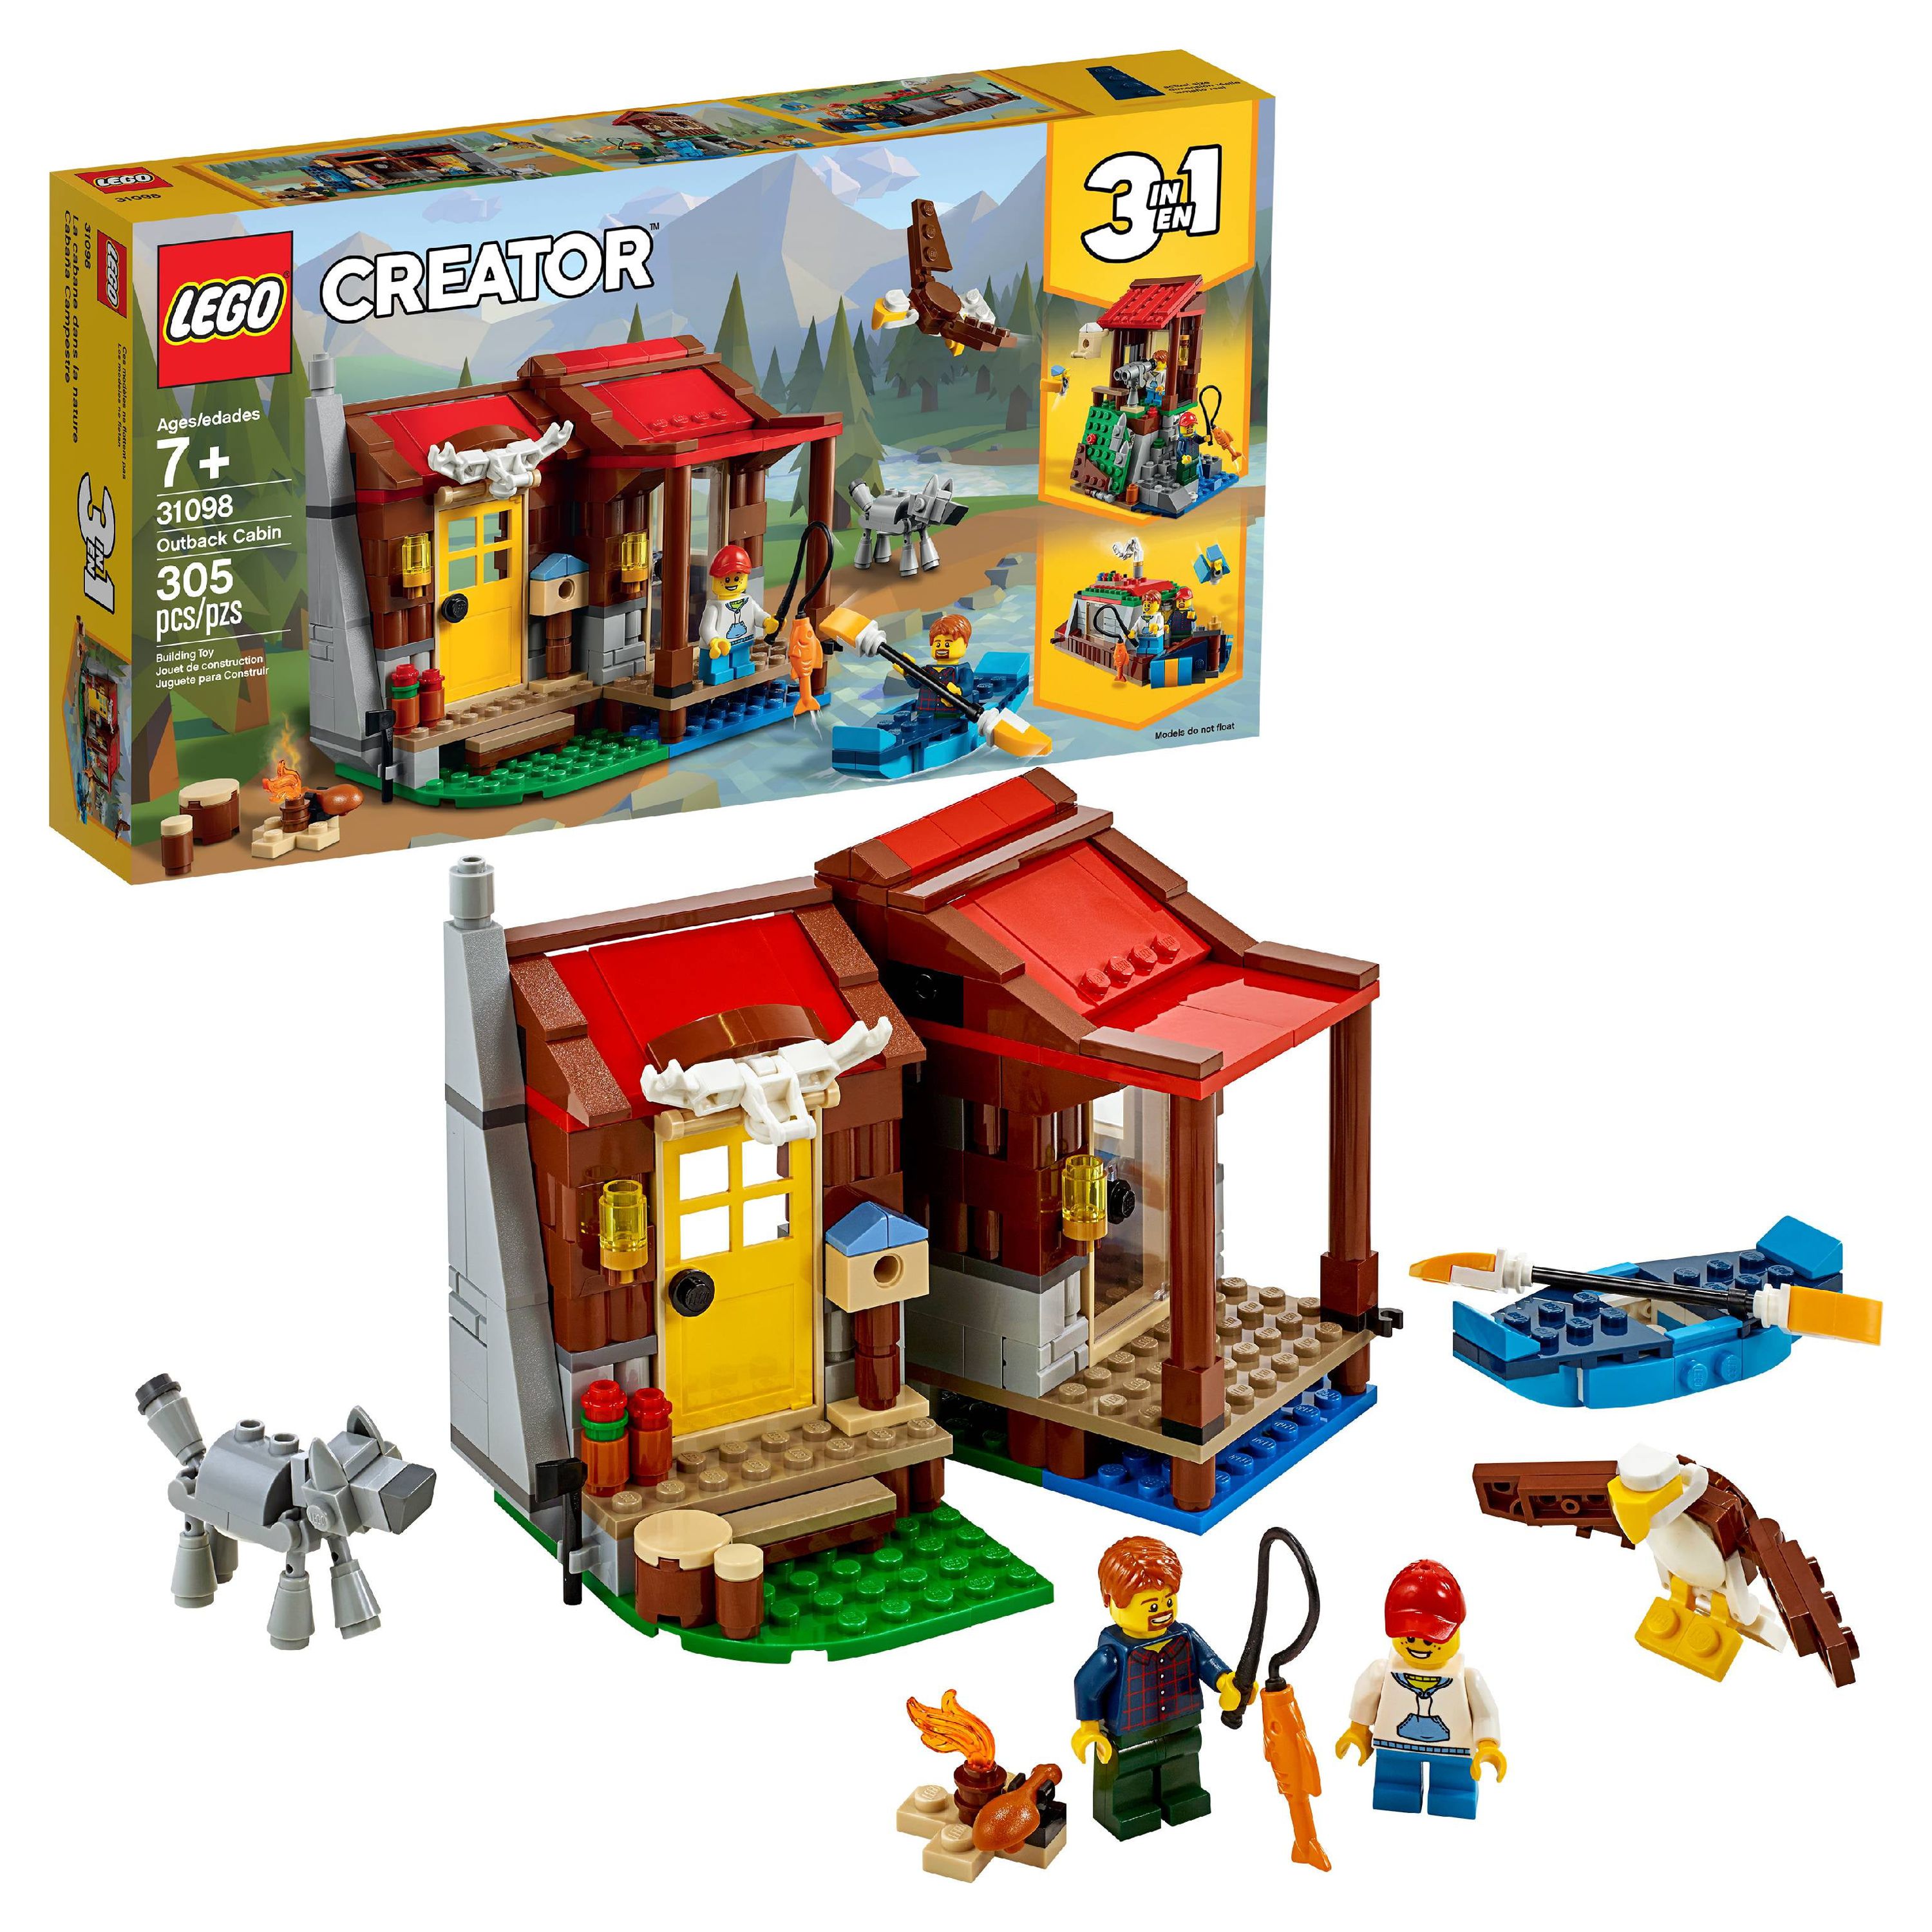 LEGO Creator Outback Cabin 31098 Toy Building Kit (305 Pieces) - image 1 of 8